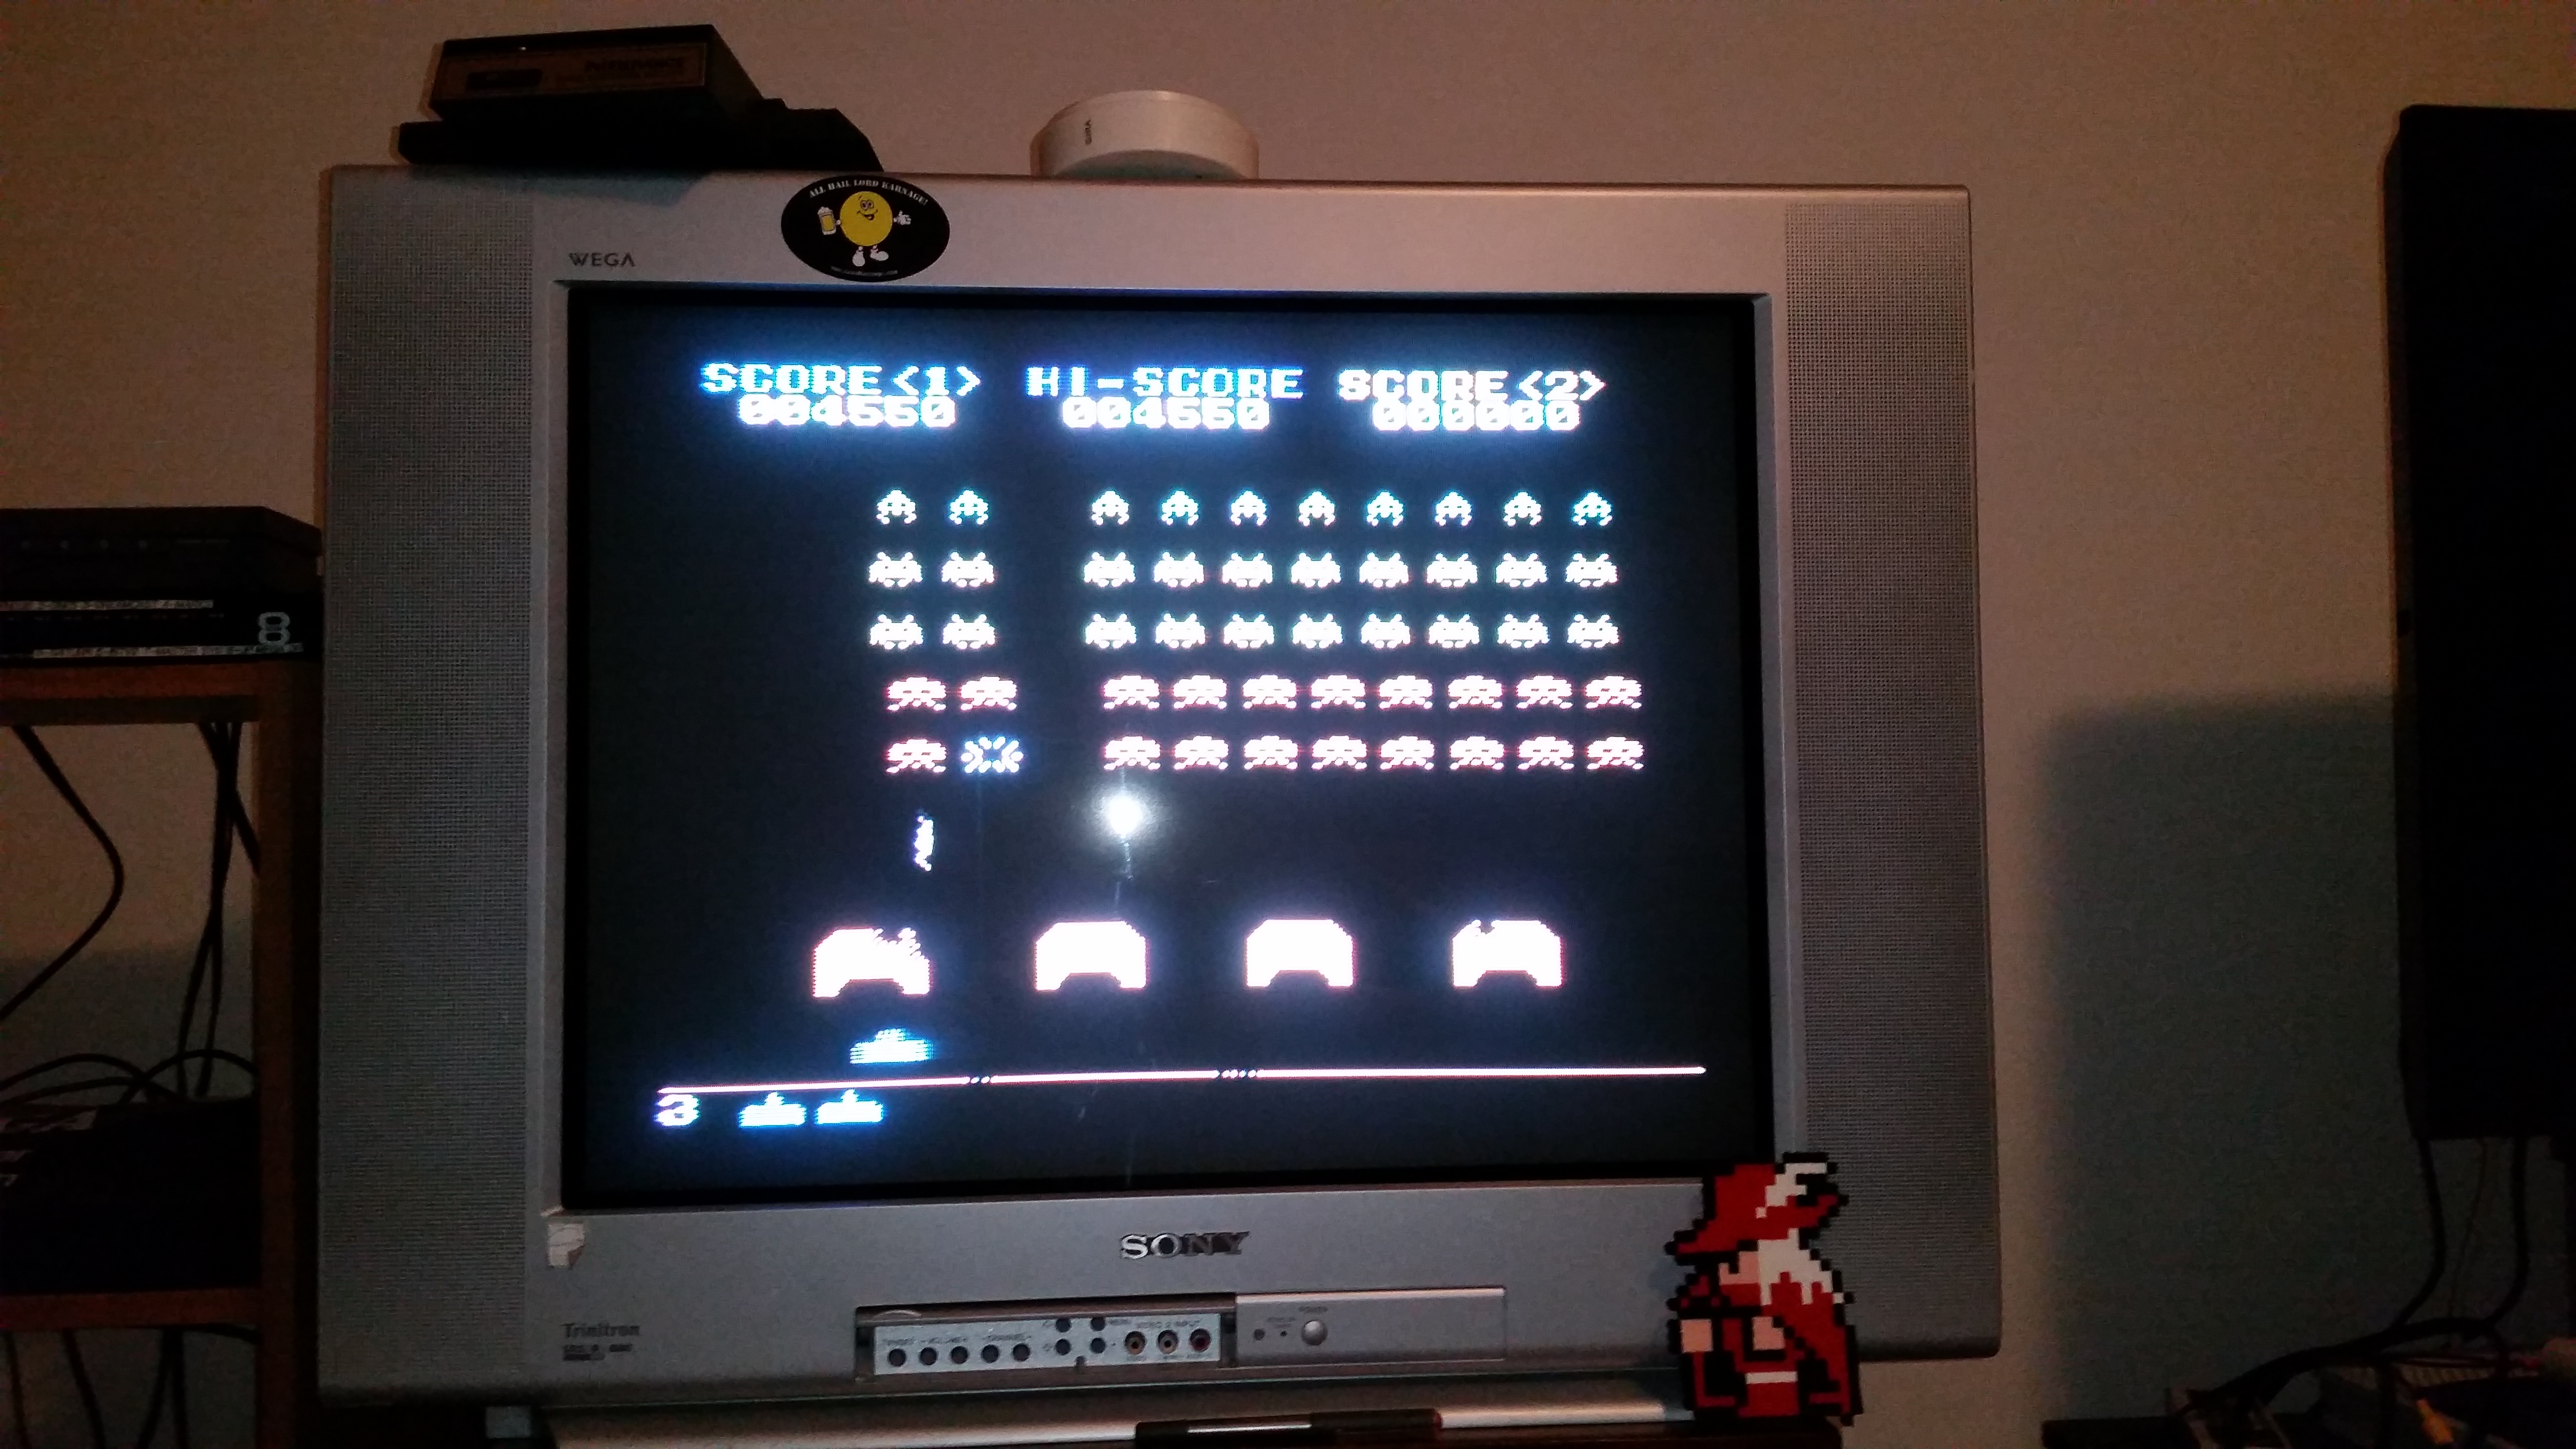 Space Invaders 4,550 points